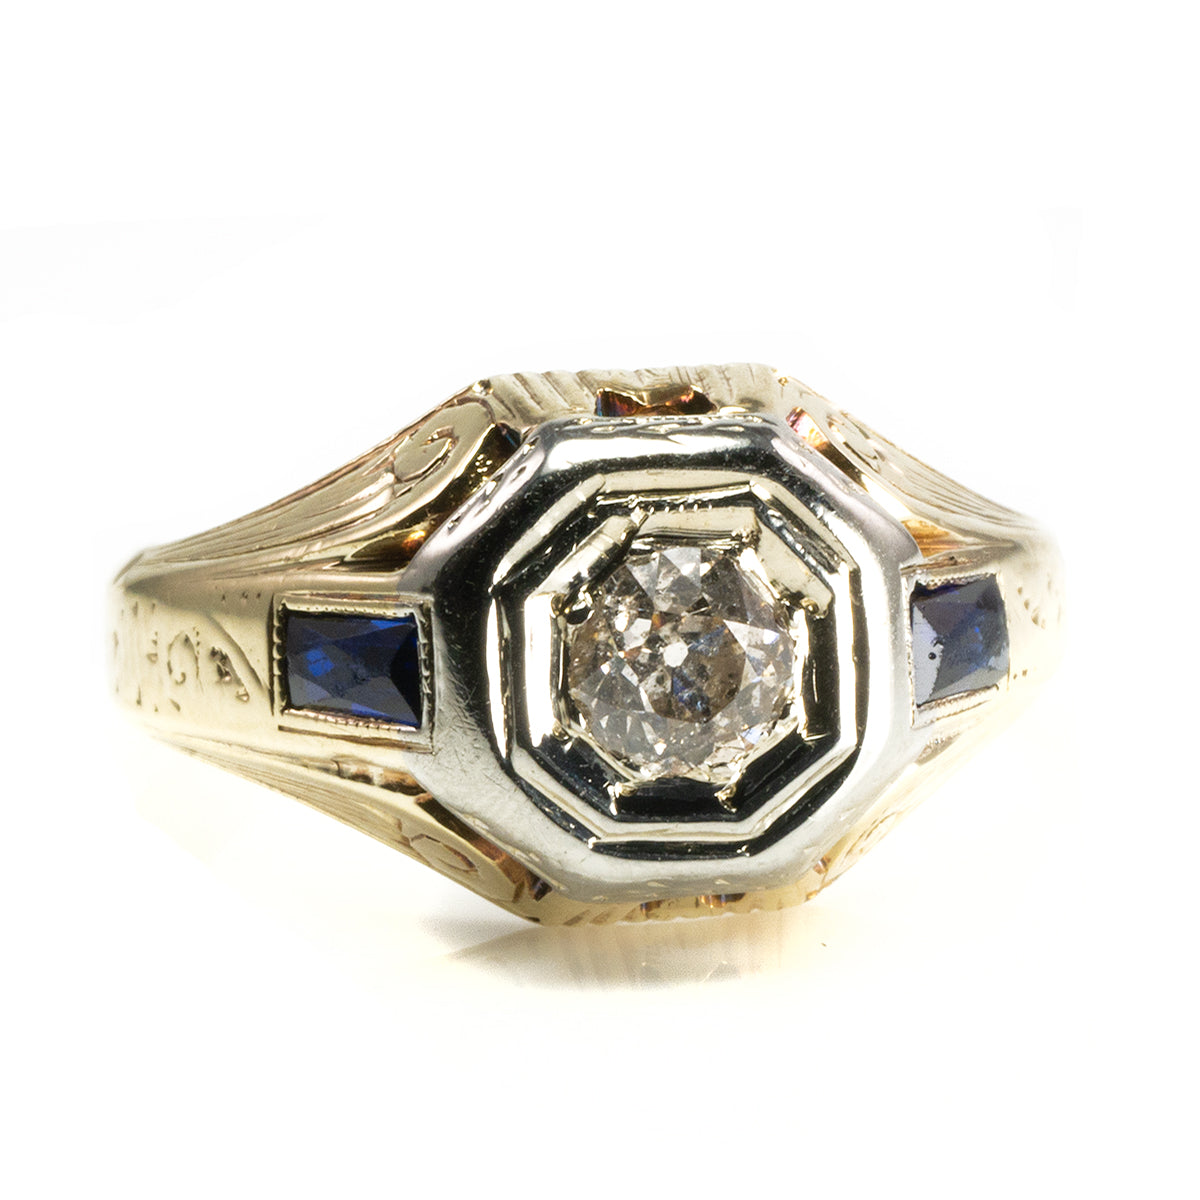 Great Lakes Boutique Vintage 14 k / 18 k Art Deco Diamond and Sapphire Ring